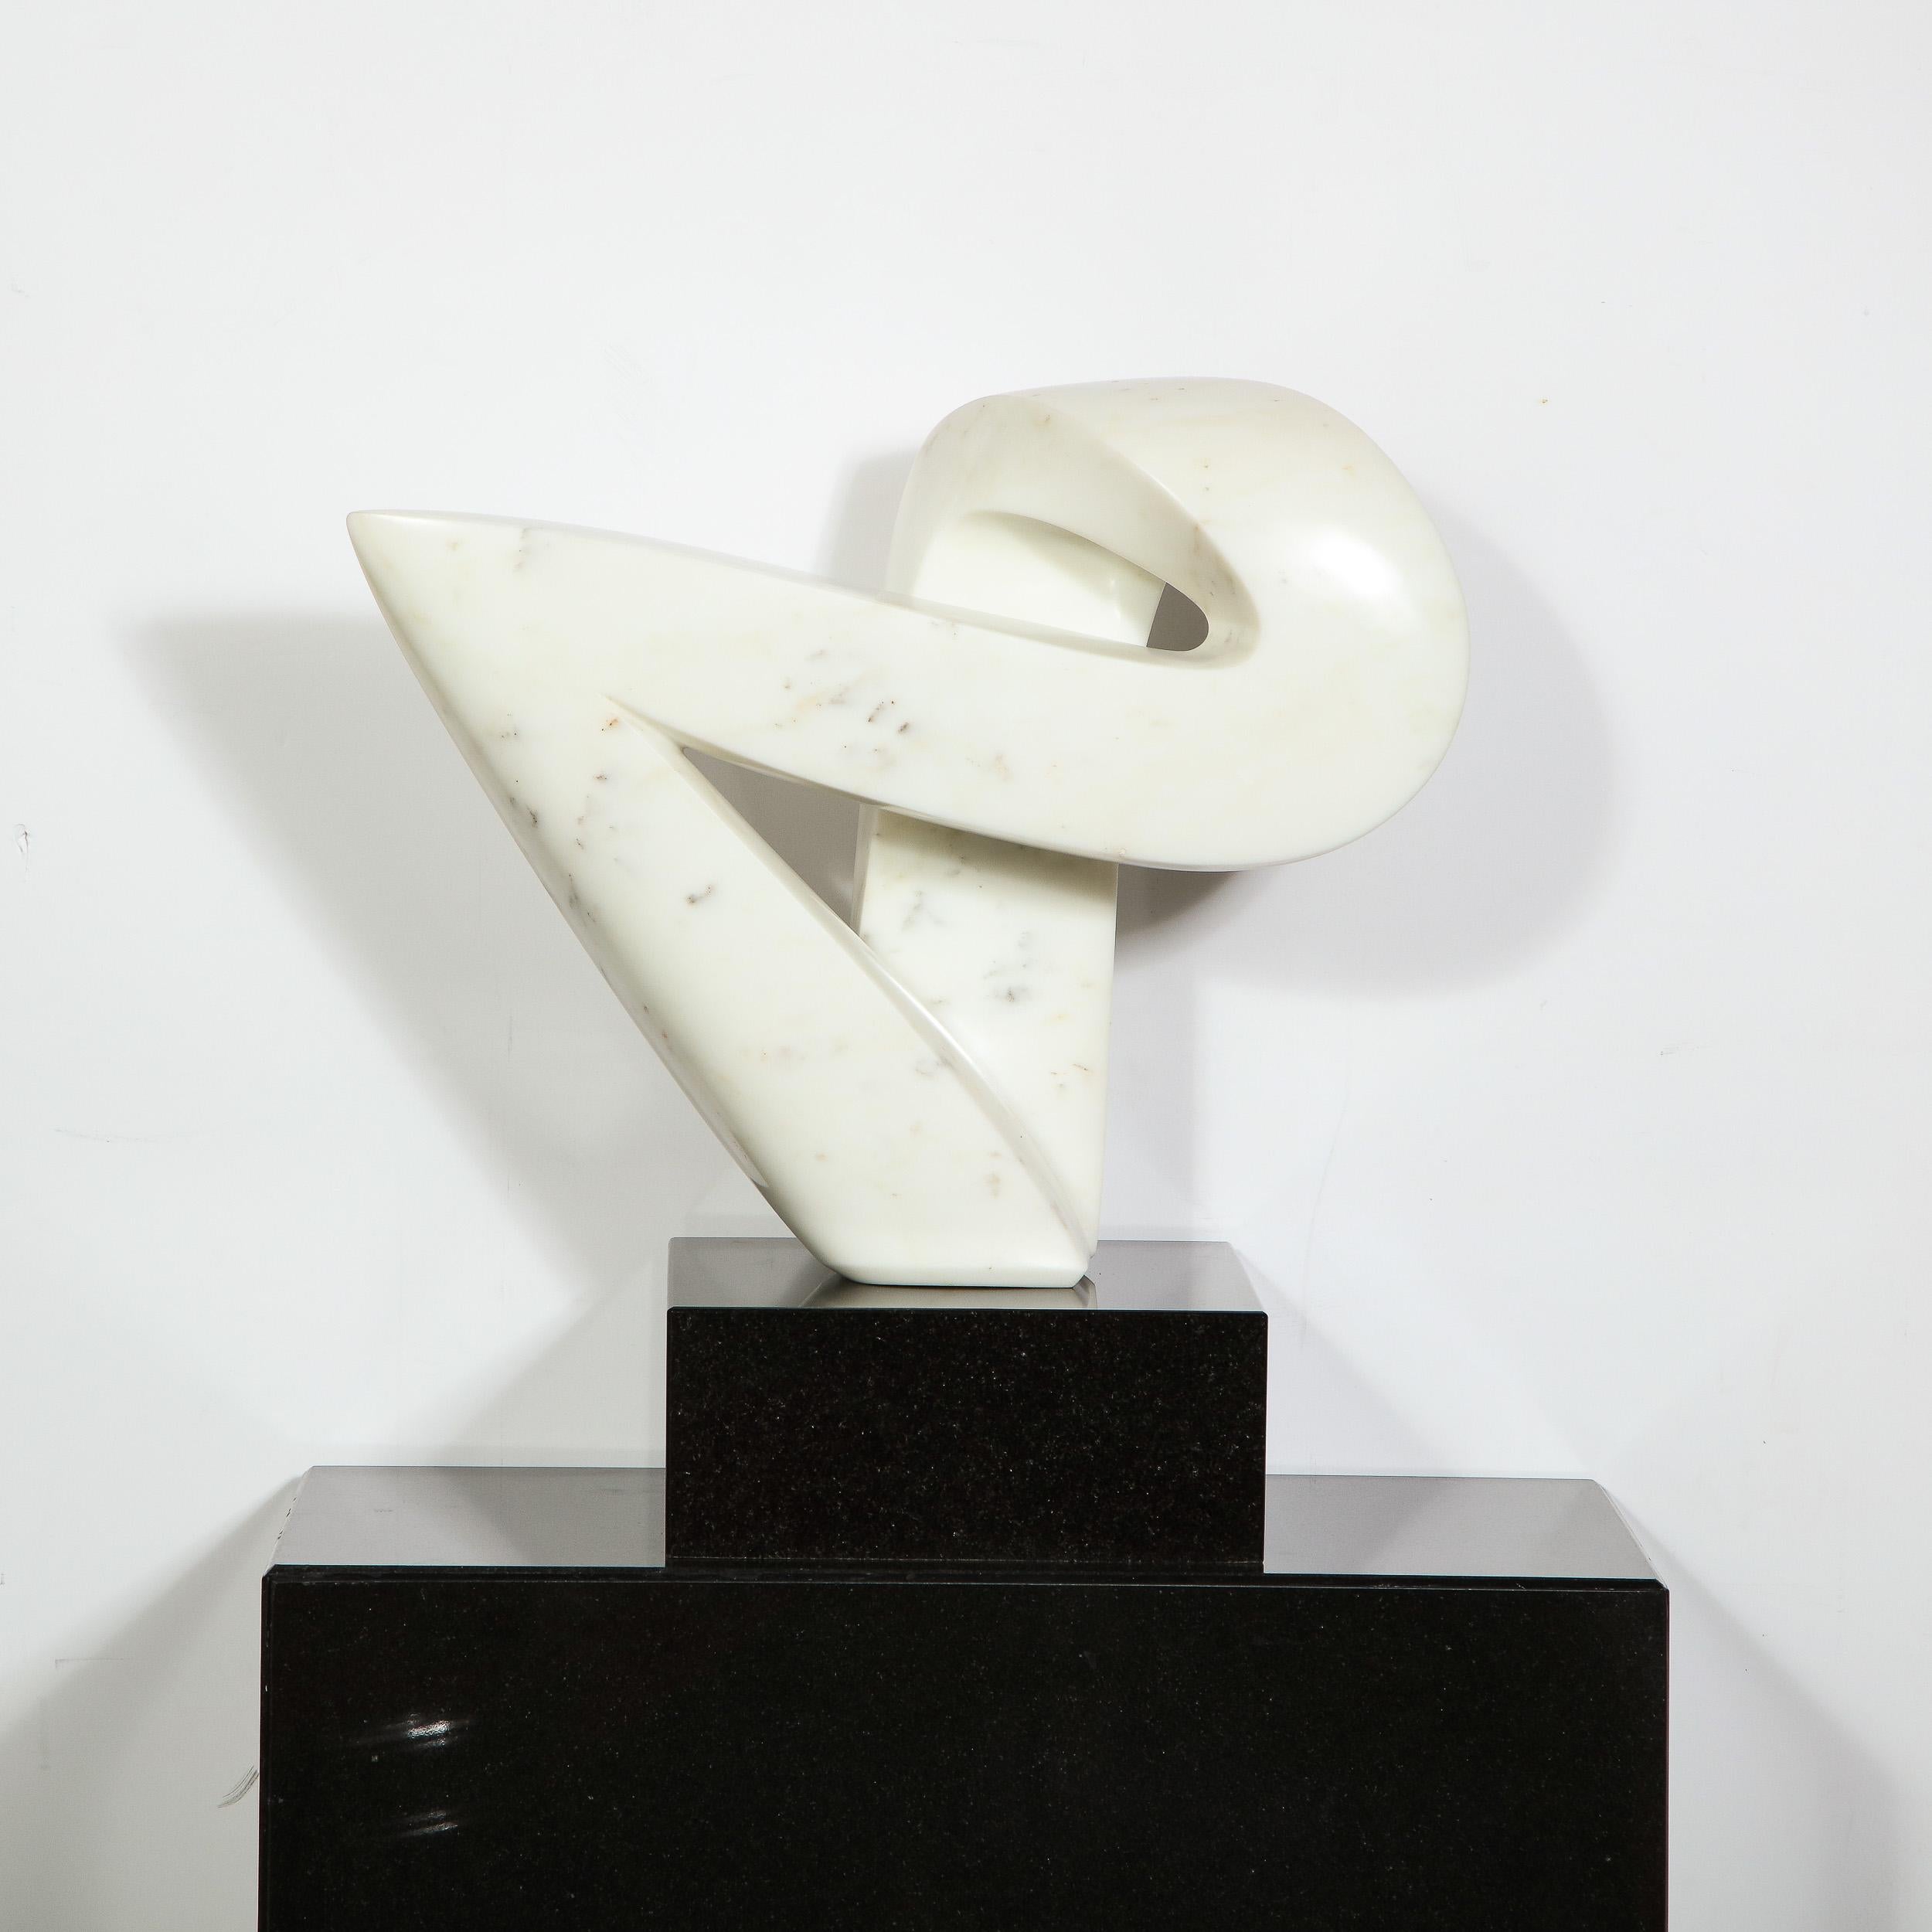 This elegant Mid-Century Modern sculpture was realized in the United States, circa 1970. It features an organic abstract sinuously curved form- full of verve and dynamism- with a flawless rounded surface in white Carrara marble. It sits on a large